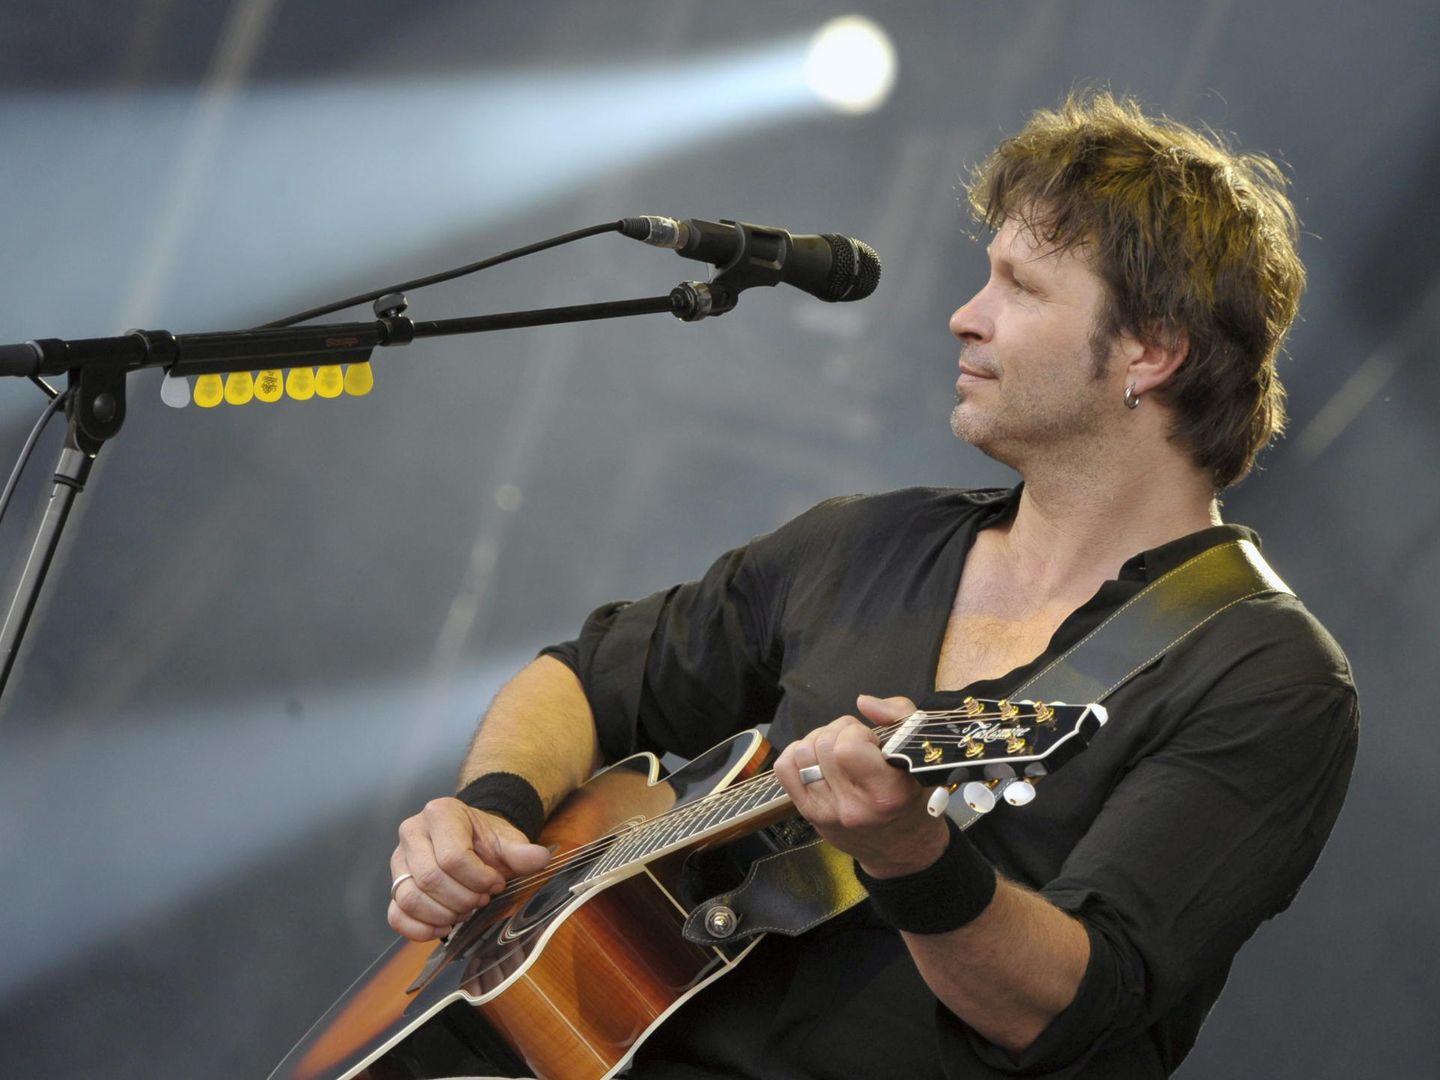 VCH122. Carhaix (France), 19/07/2014.- French singer Bertrand Cantat performs with his new band Detroit during the Vieilles Charrues Festival in Carhaix, France, 19 July 2014. The music festival runs from 17 to 20 July. (Francia, Francia) EFE/EPA/HUGO MARIE